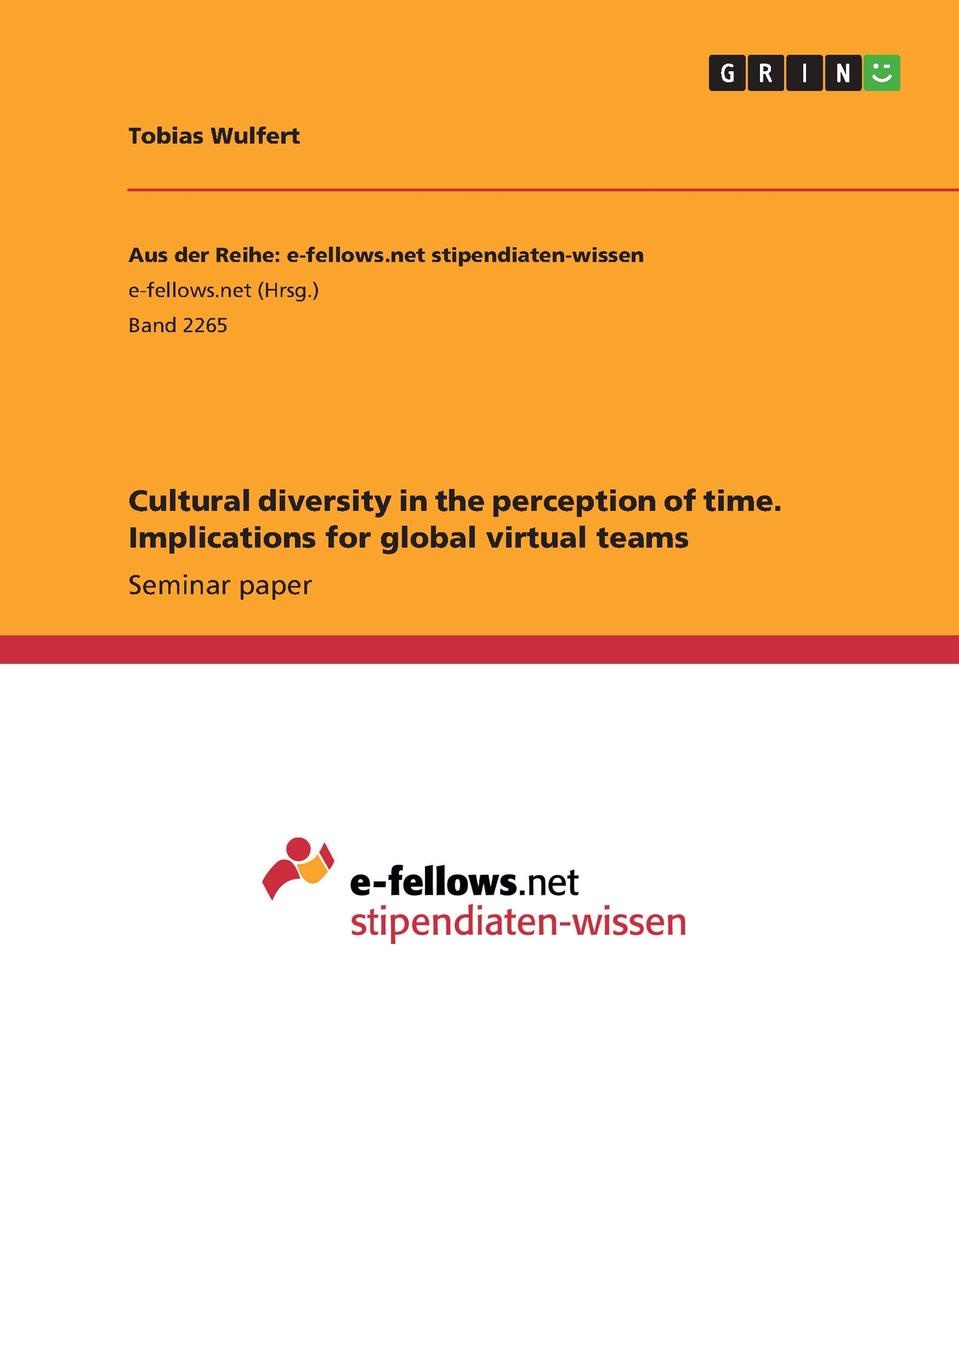 Cultural diversity in the perception of time. Implications for global virtual teams